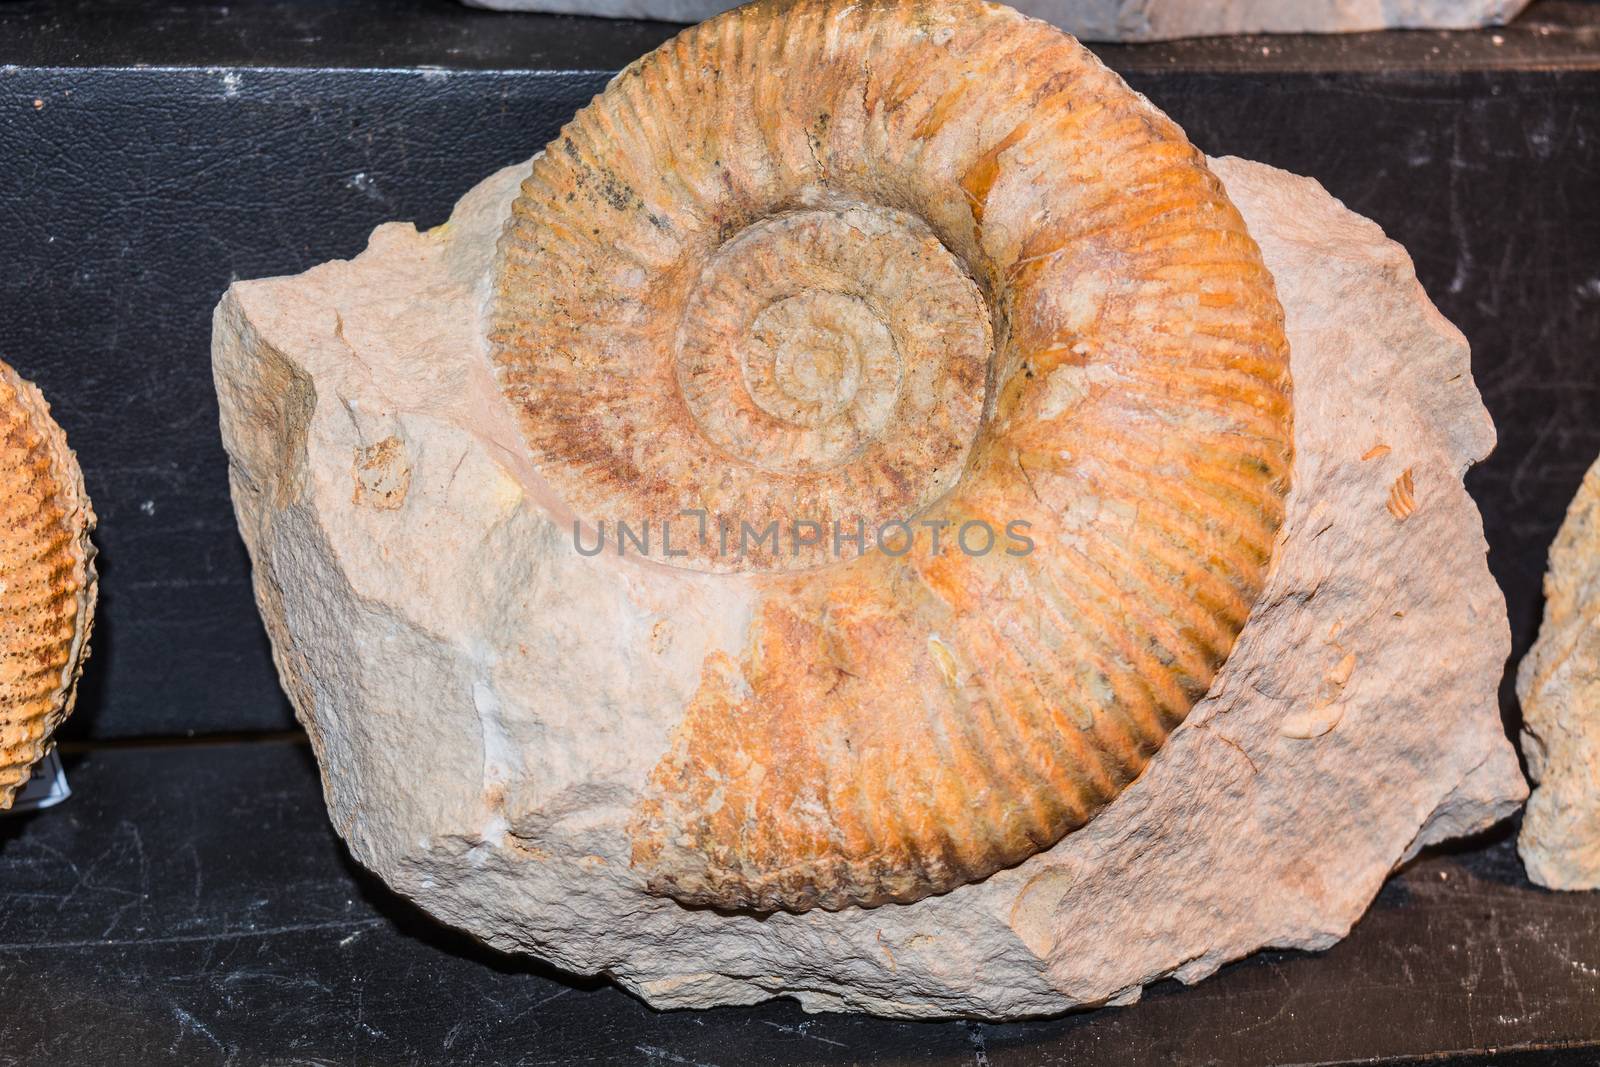 Ammonite fossil by JFsPic